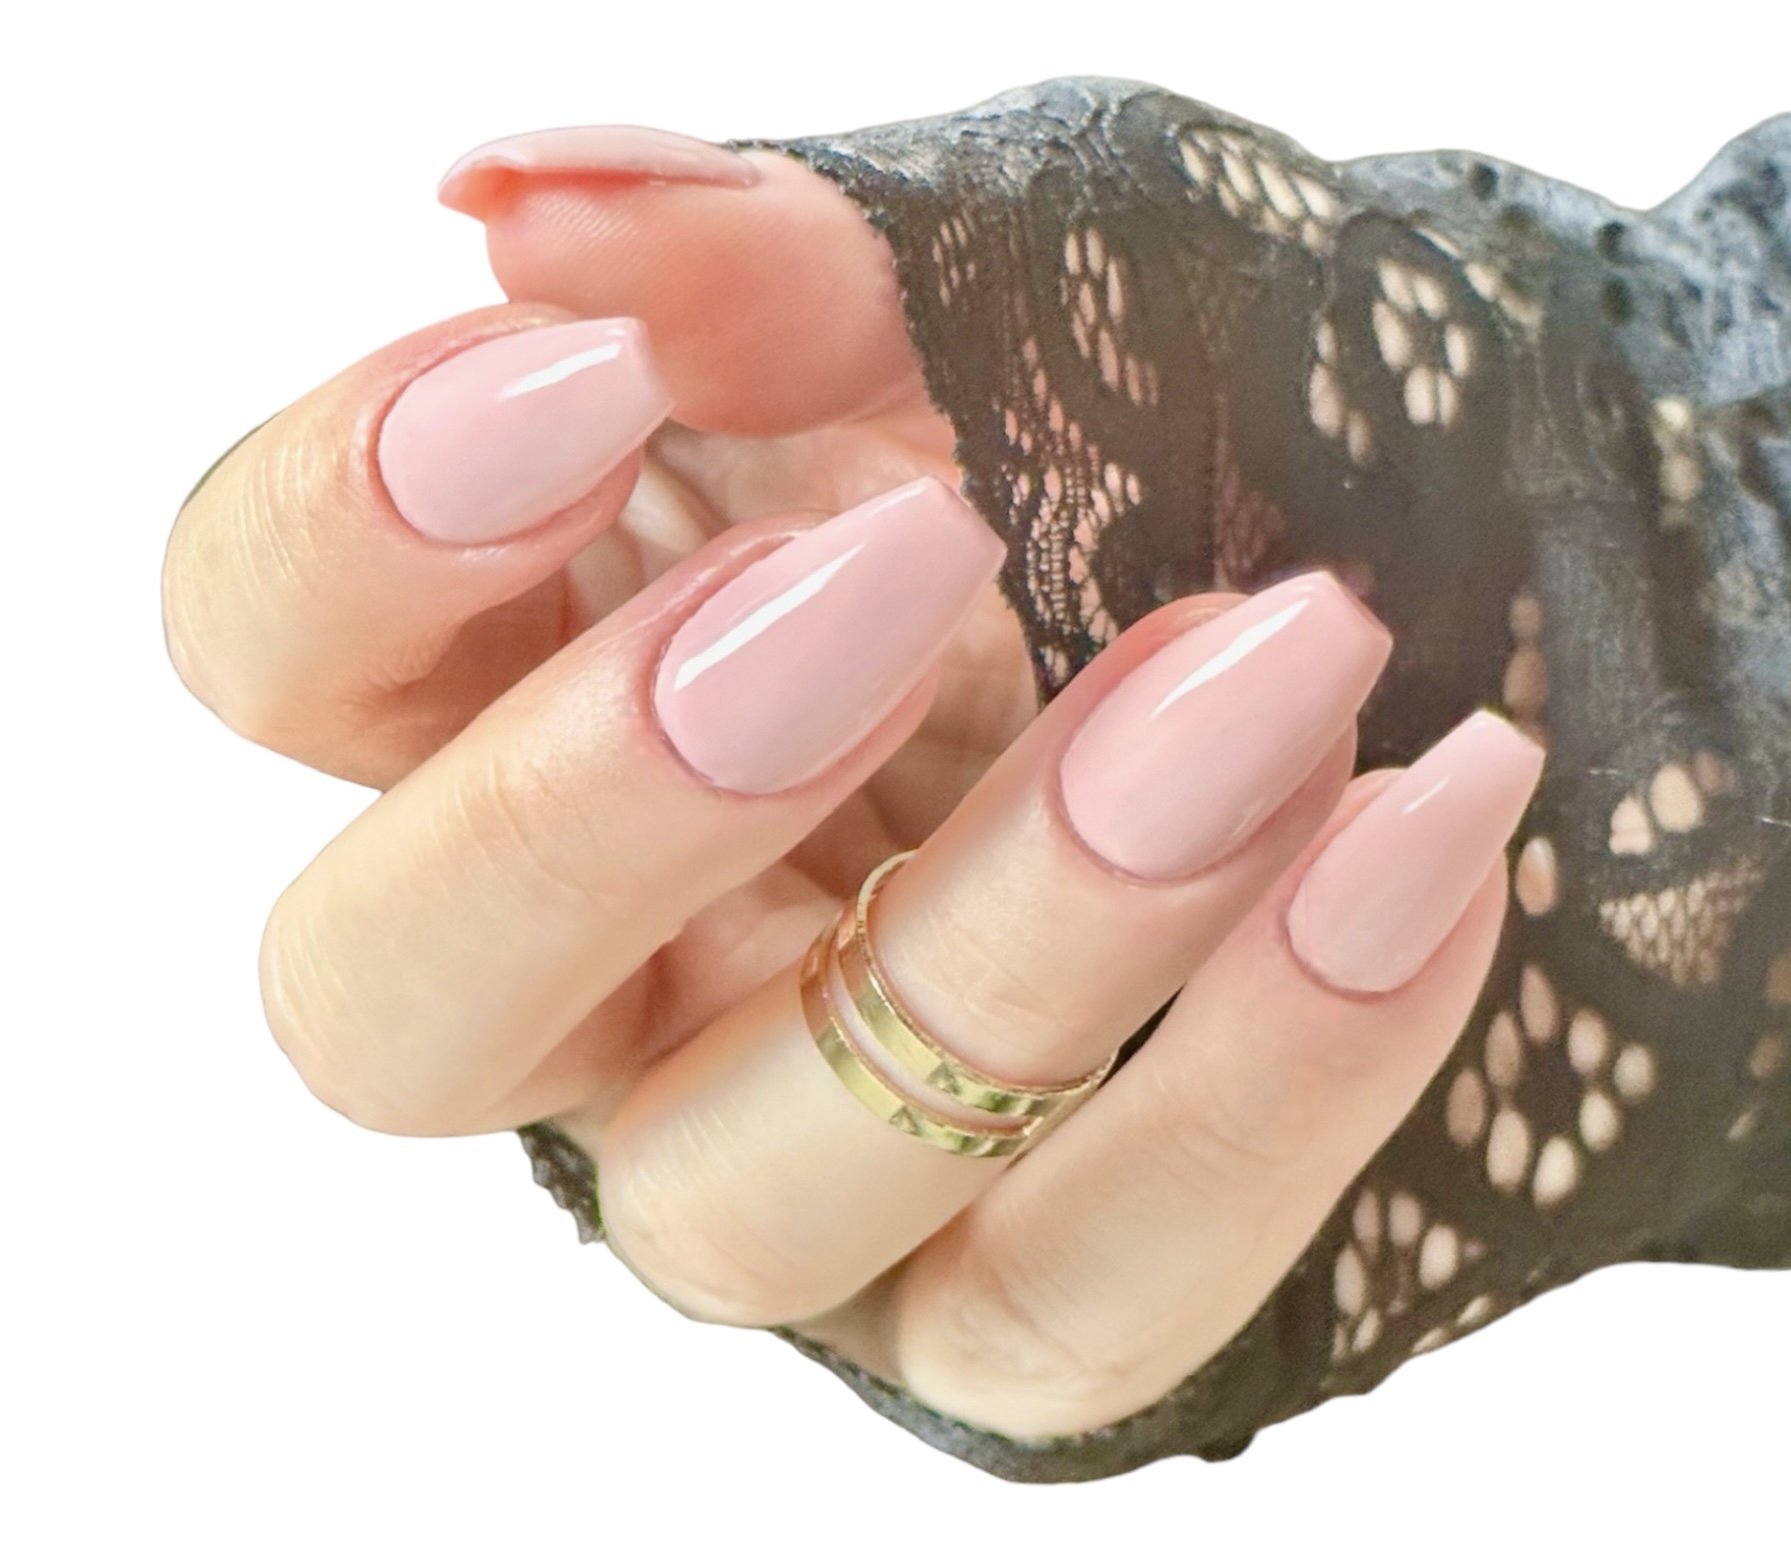 Is light pink nail polish unprofessional​ for a job interview forthe ​  biotech industry? : r/LadiesofScience